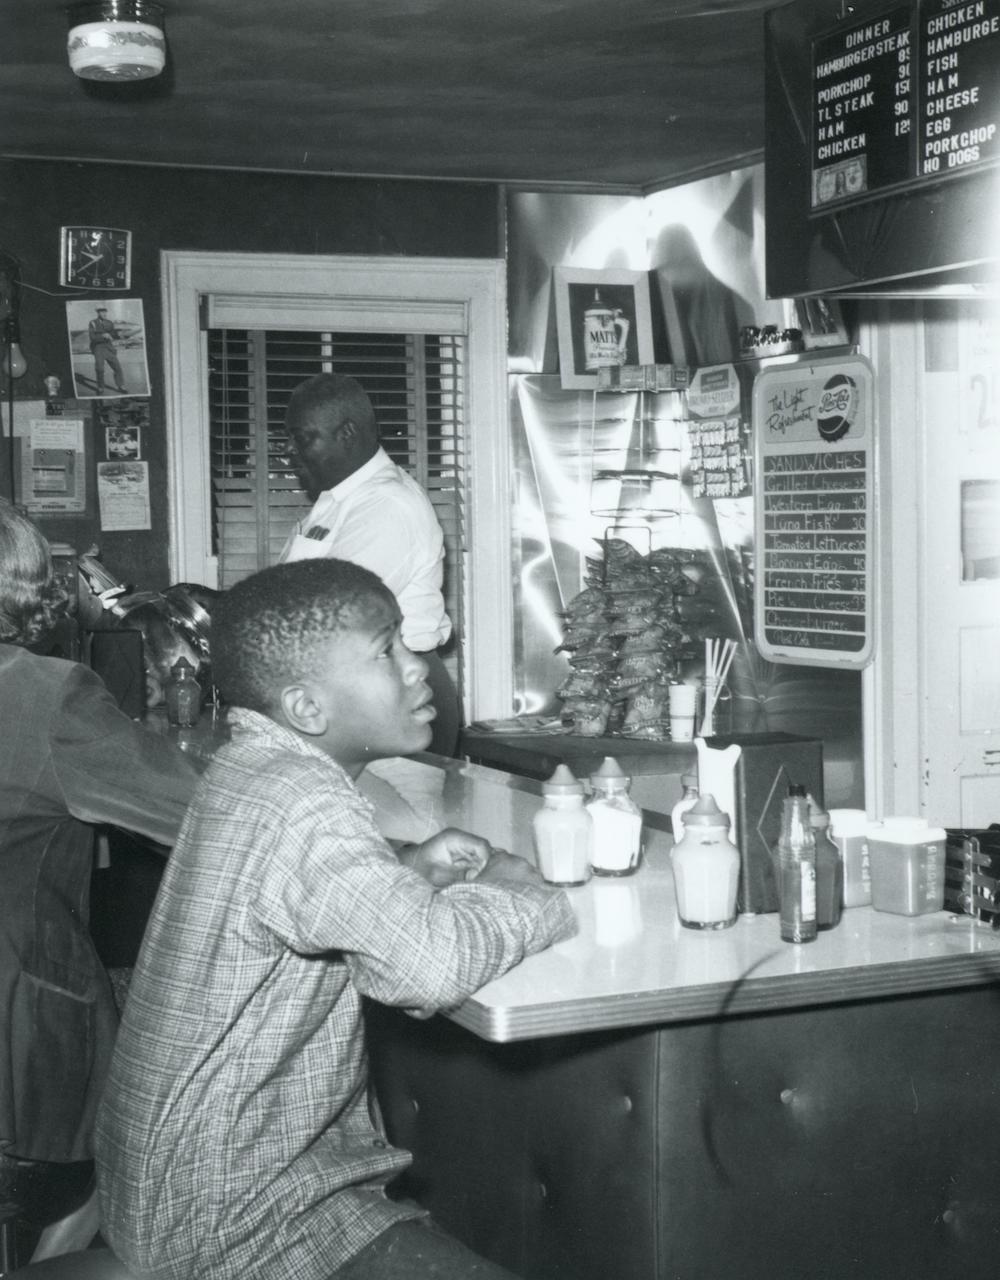 A young boy contemplates what to order at a lunch counter as an employee works in the background. 